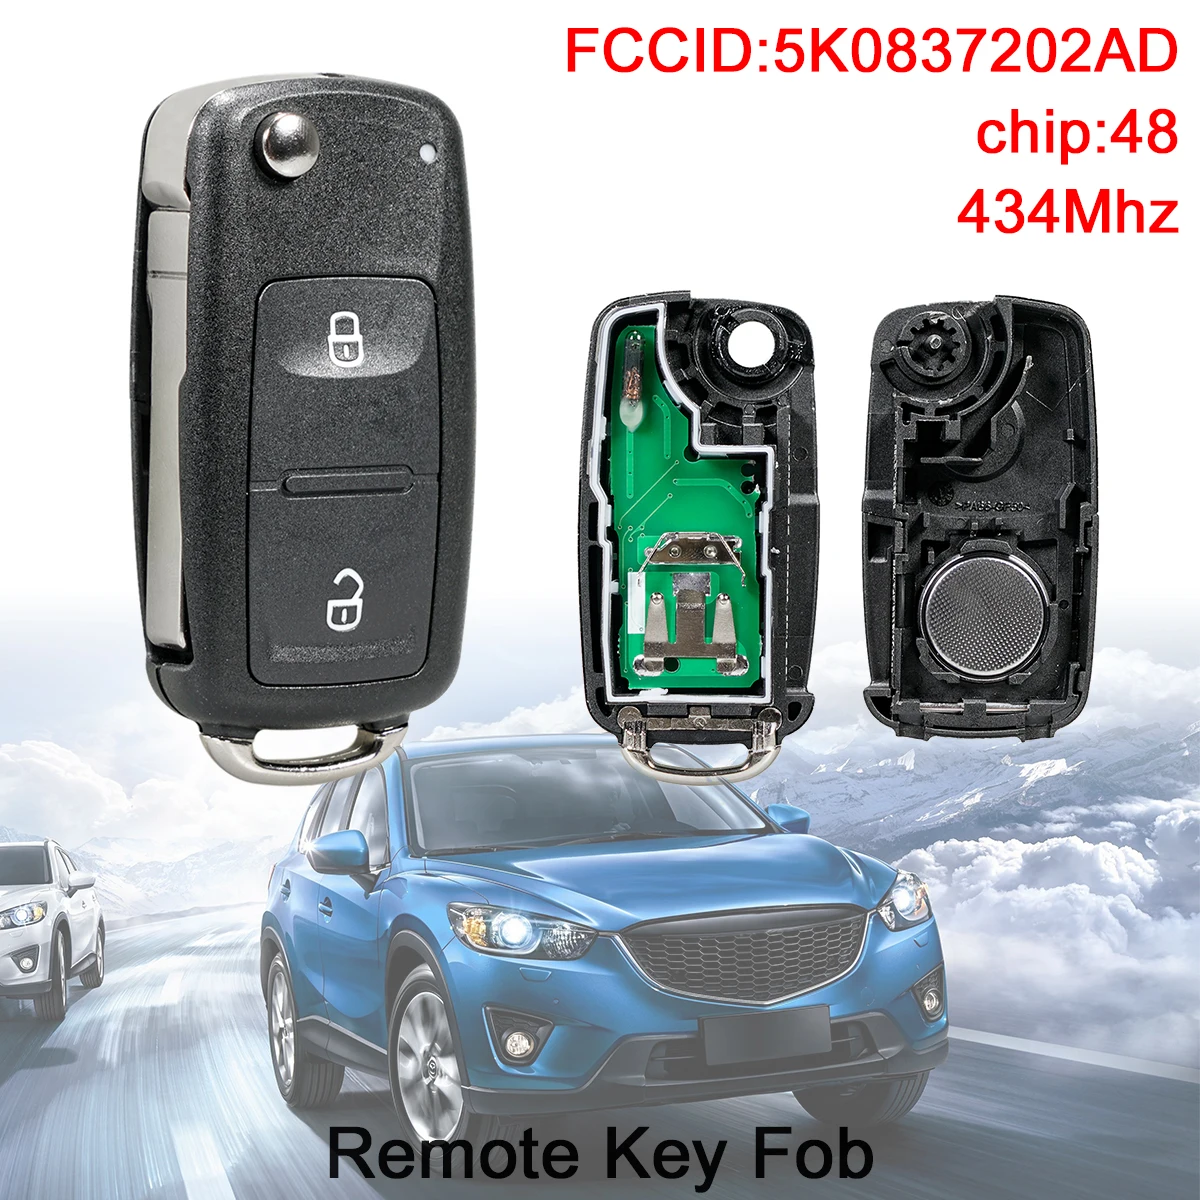 2 Buttons 433MHz  Keyless Smart Remote Car Key Fob with ID48 Chip5K0837202AD Fit for Volkswagen VW  Transporter 2011-2016 433mhz 3 buttons keyless uncut flip car key remote key fob with id48 chip 4d0837231k fit for audi a6 tt old models